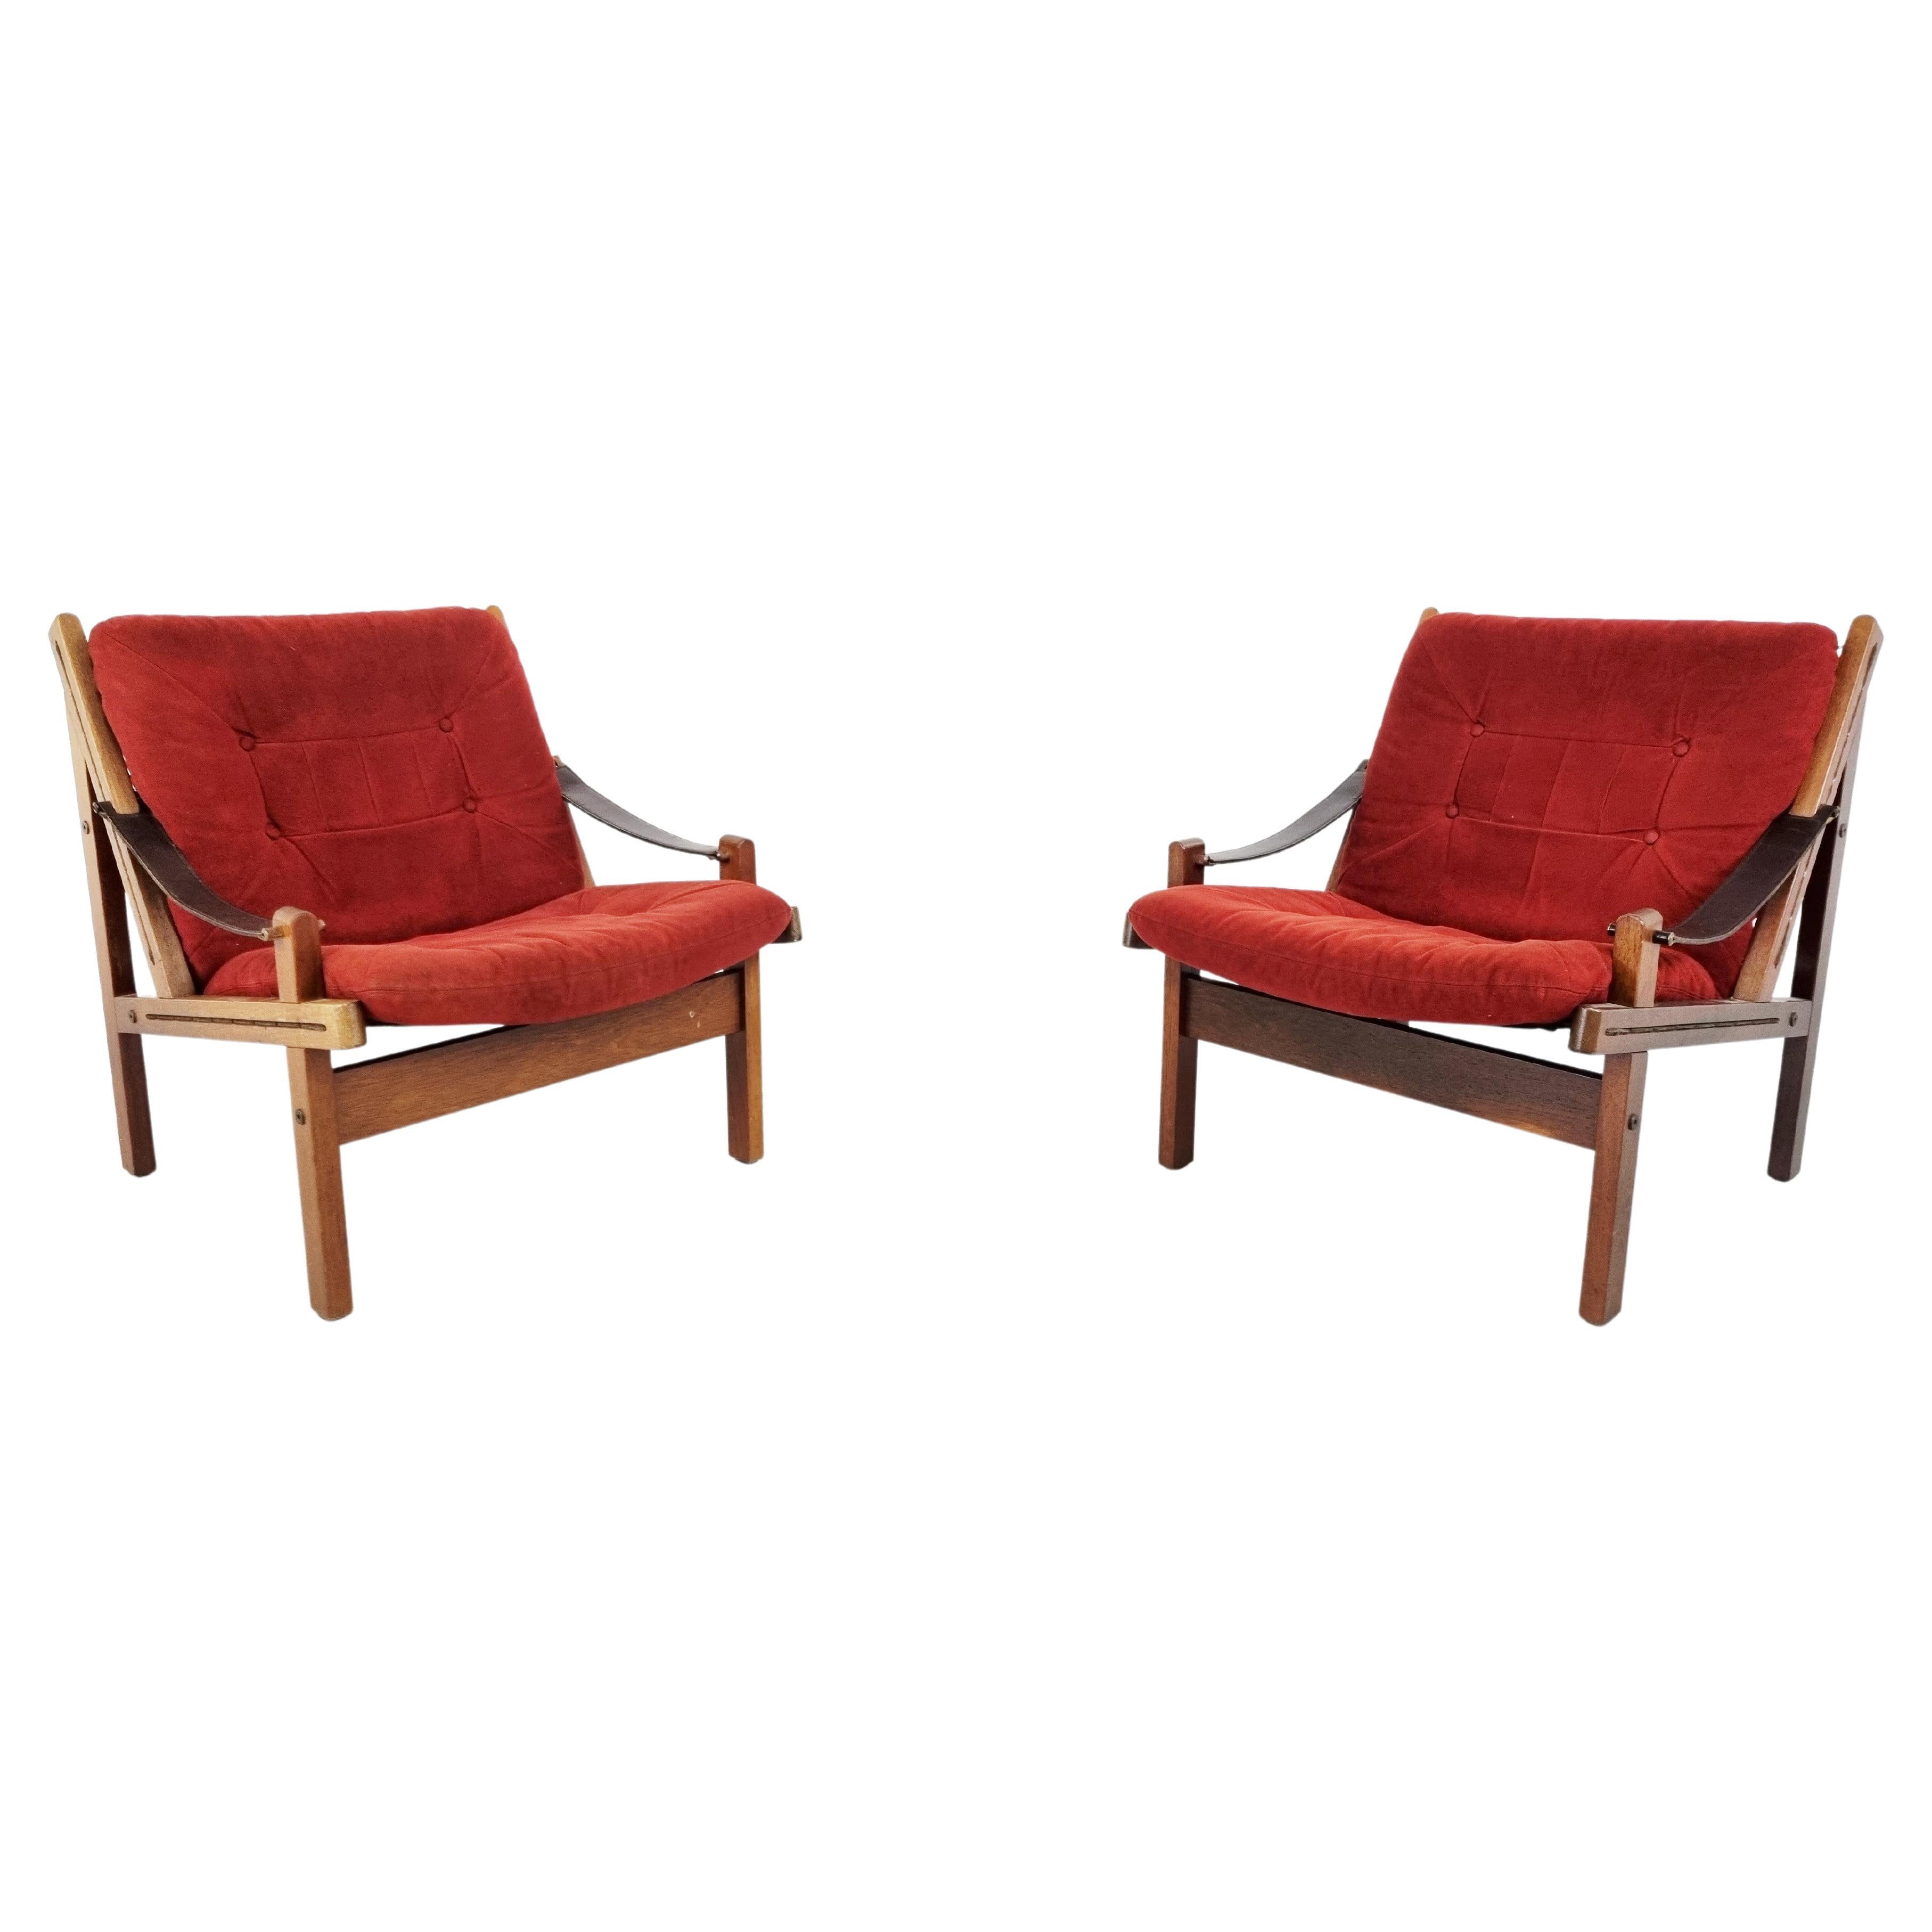 Thorbjorn Afdal Pair of Hunter Chairs, 1960s